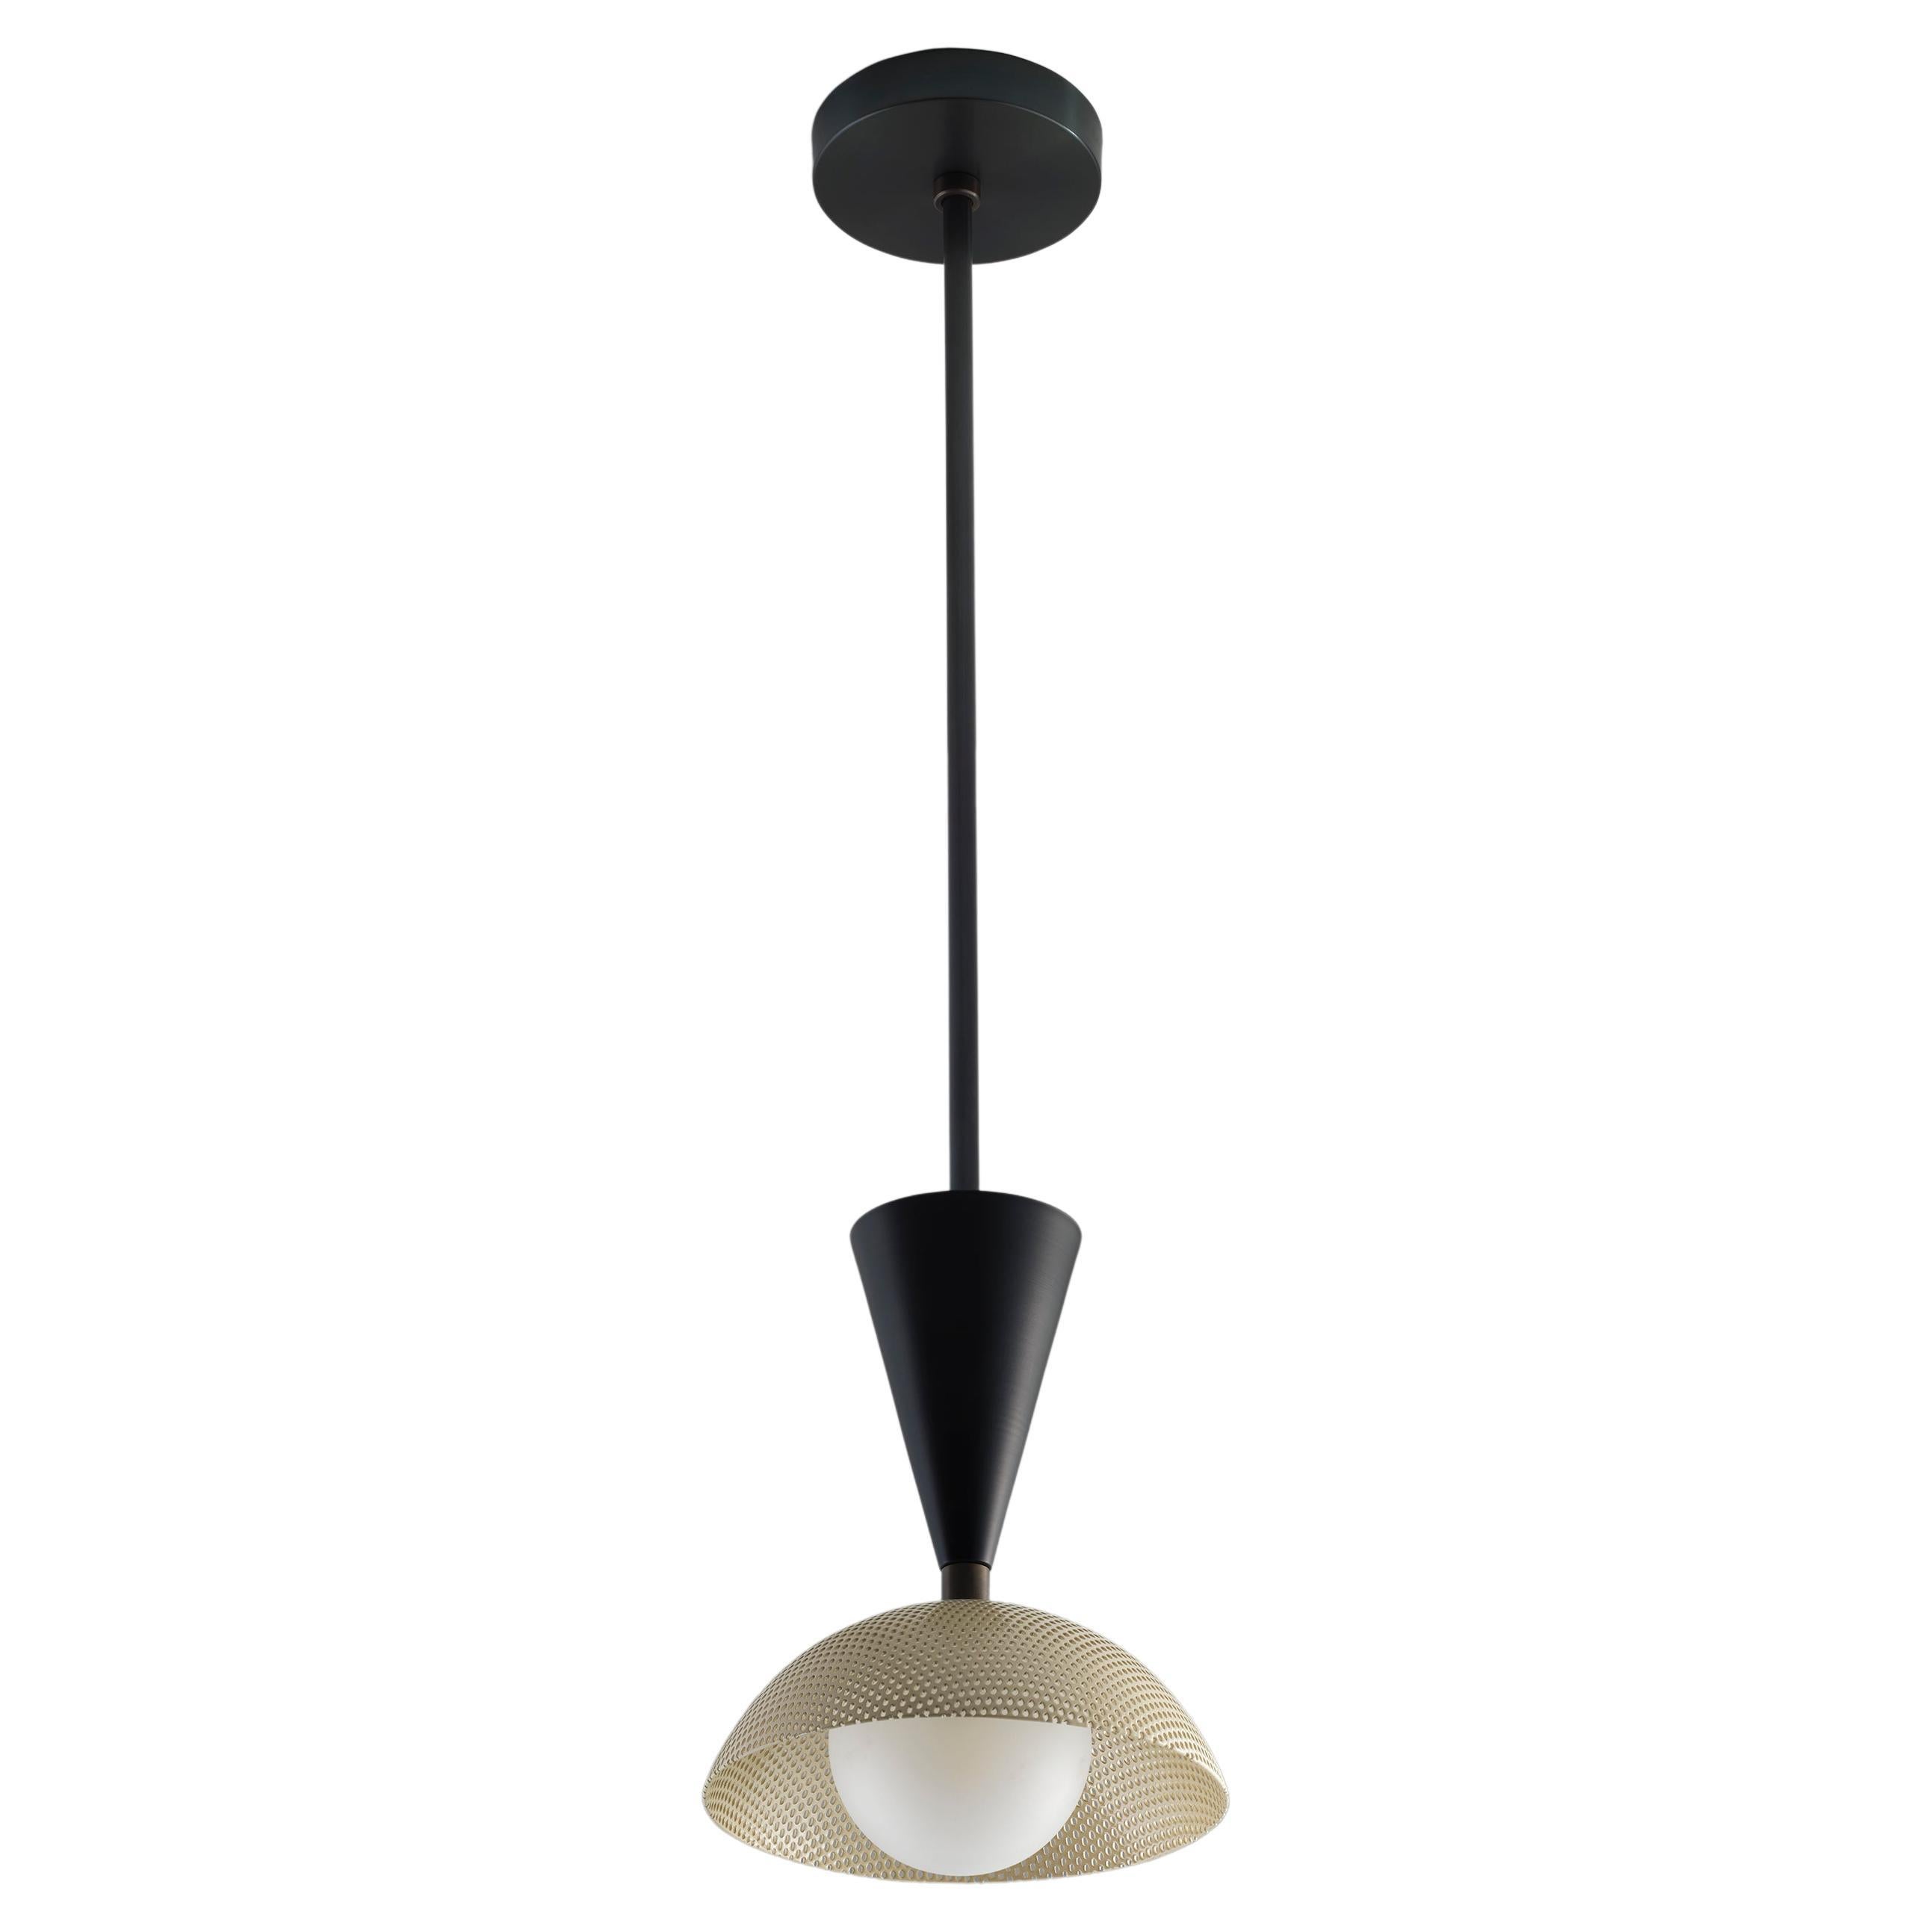 MOLTO Pendant Light in Oil-Rubbed Bronze and Enameled Mesh by Blueprint Lighting